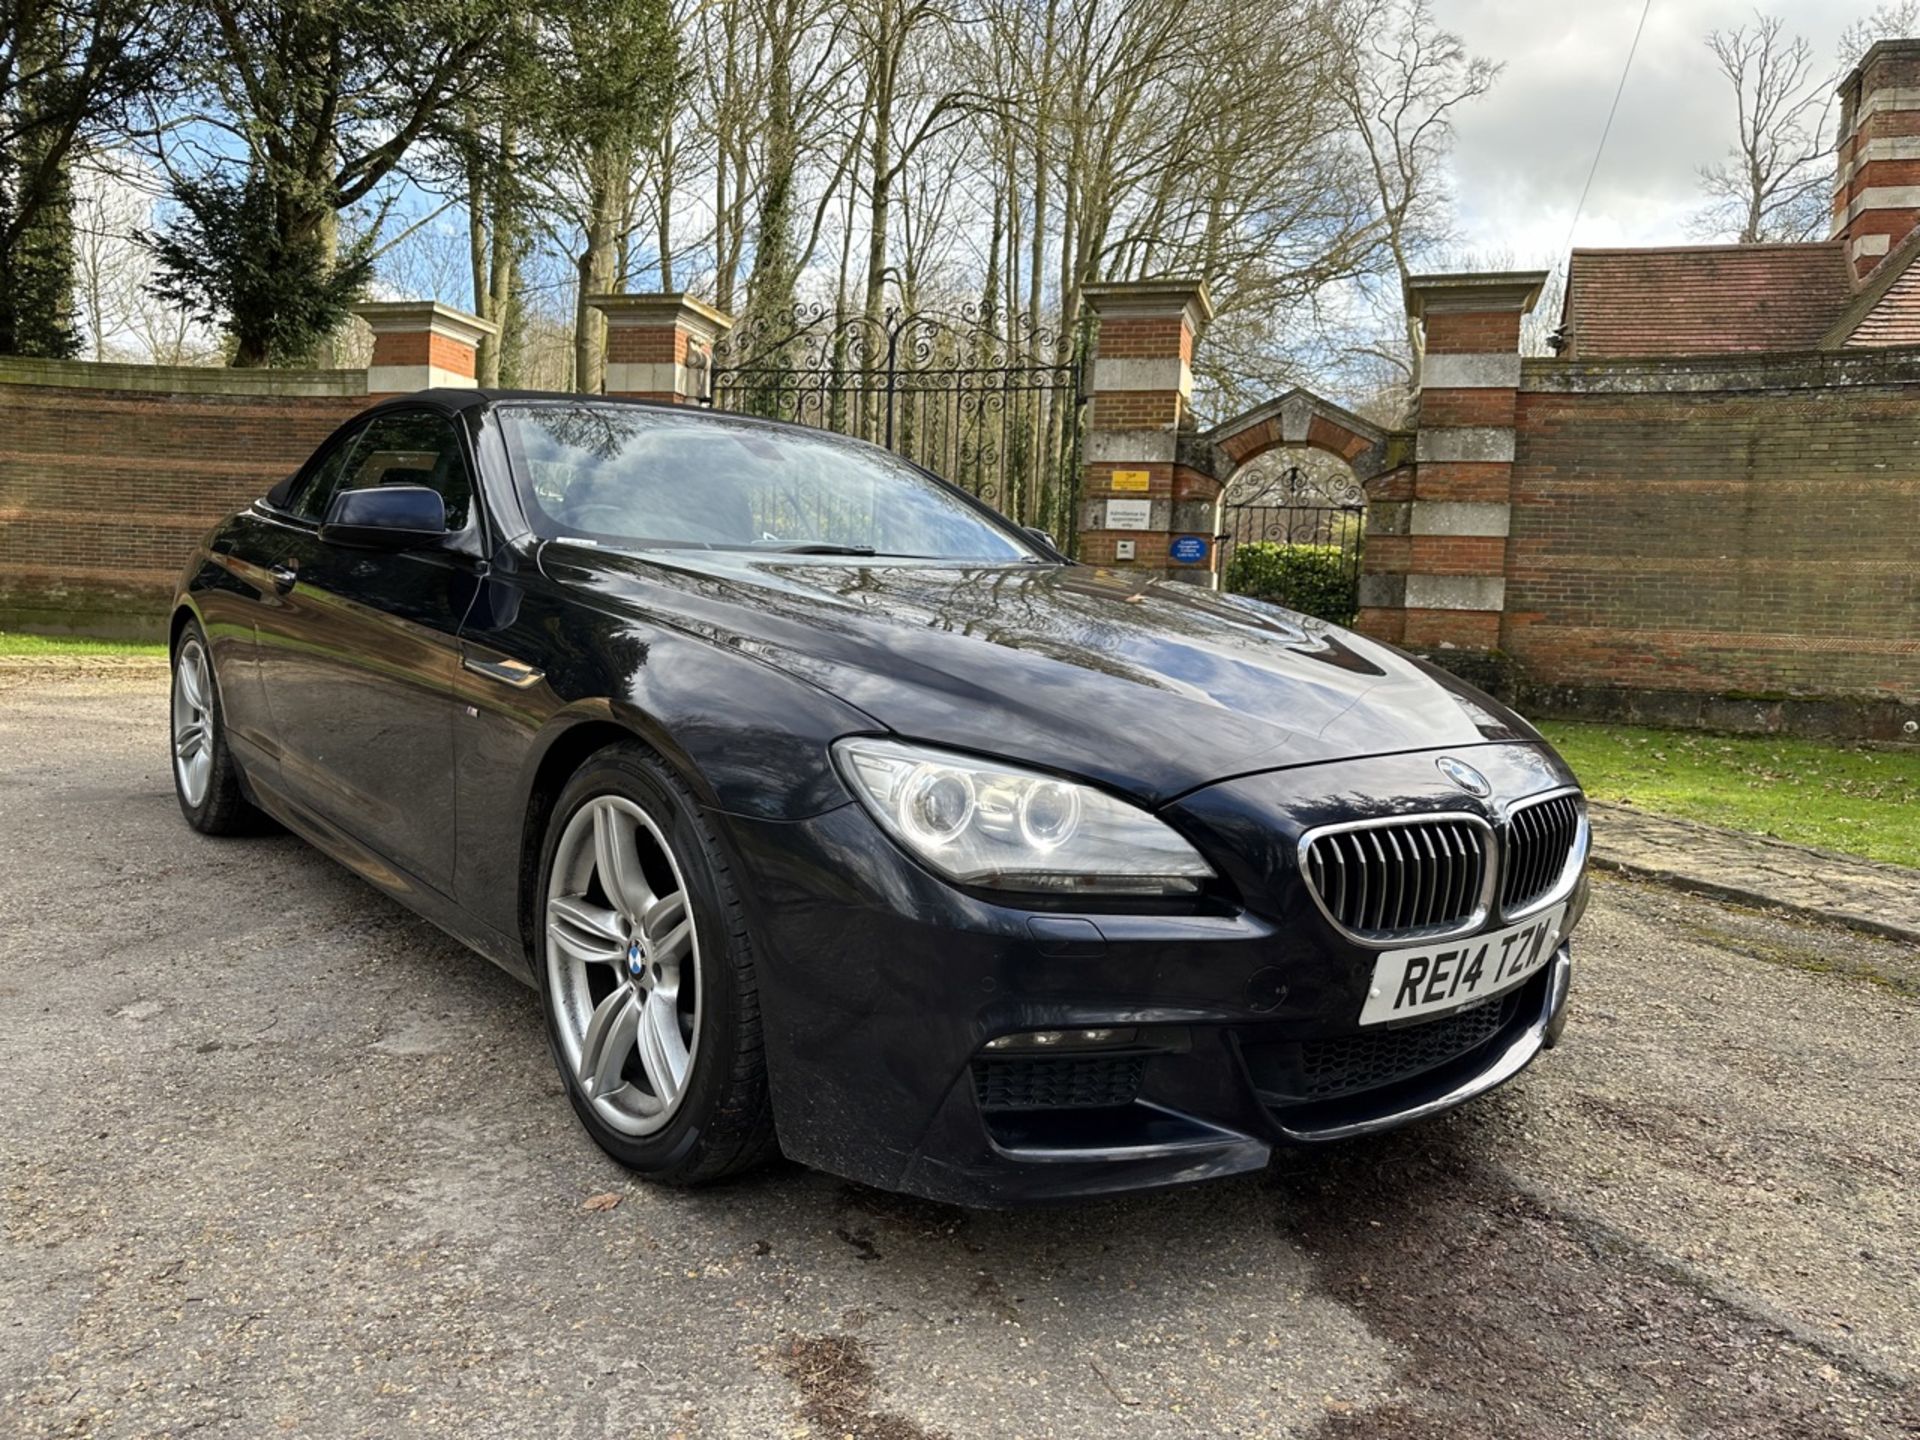 (RESERVE MET) BMW 6 SERIES 640d (M SPORT) Ultimate Summer Car - AUTOMATIC - Convertible - 2014 - Image 14 of 22